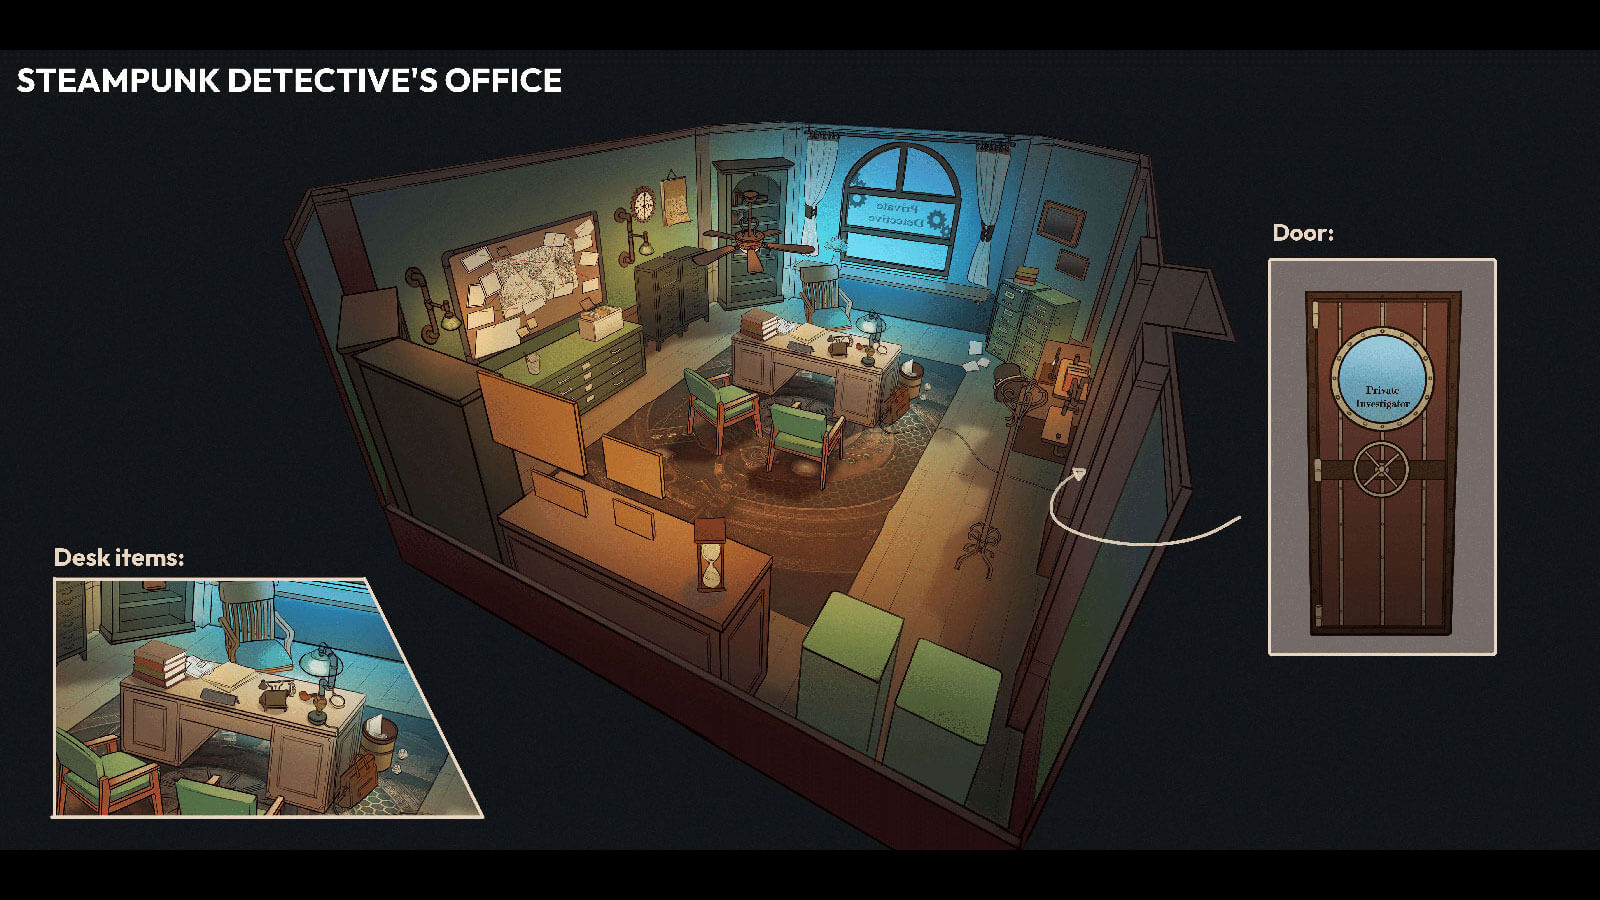 Concept drawing featuring a cut-away view of the detective's office